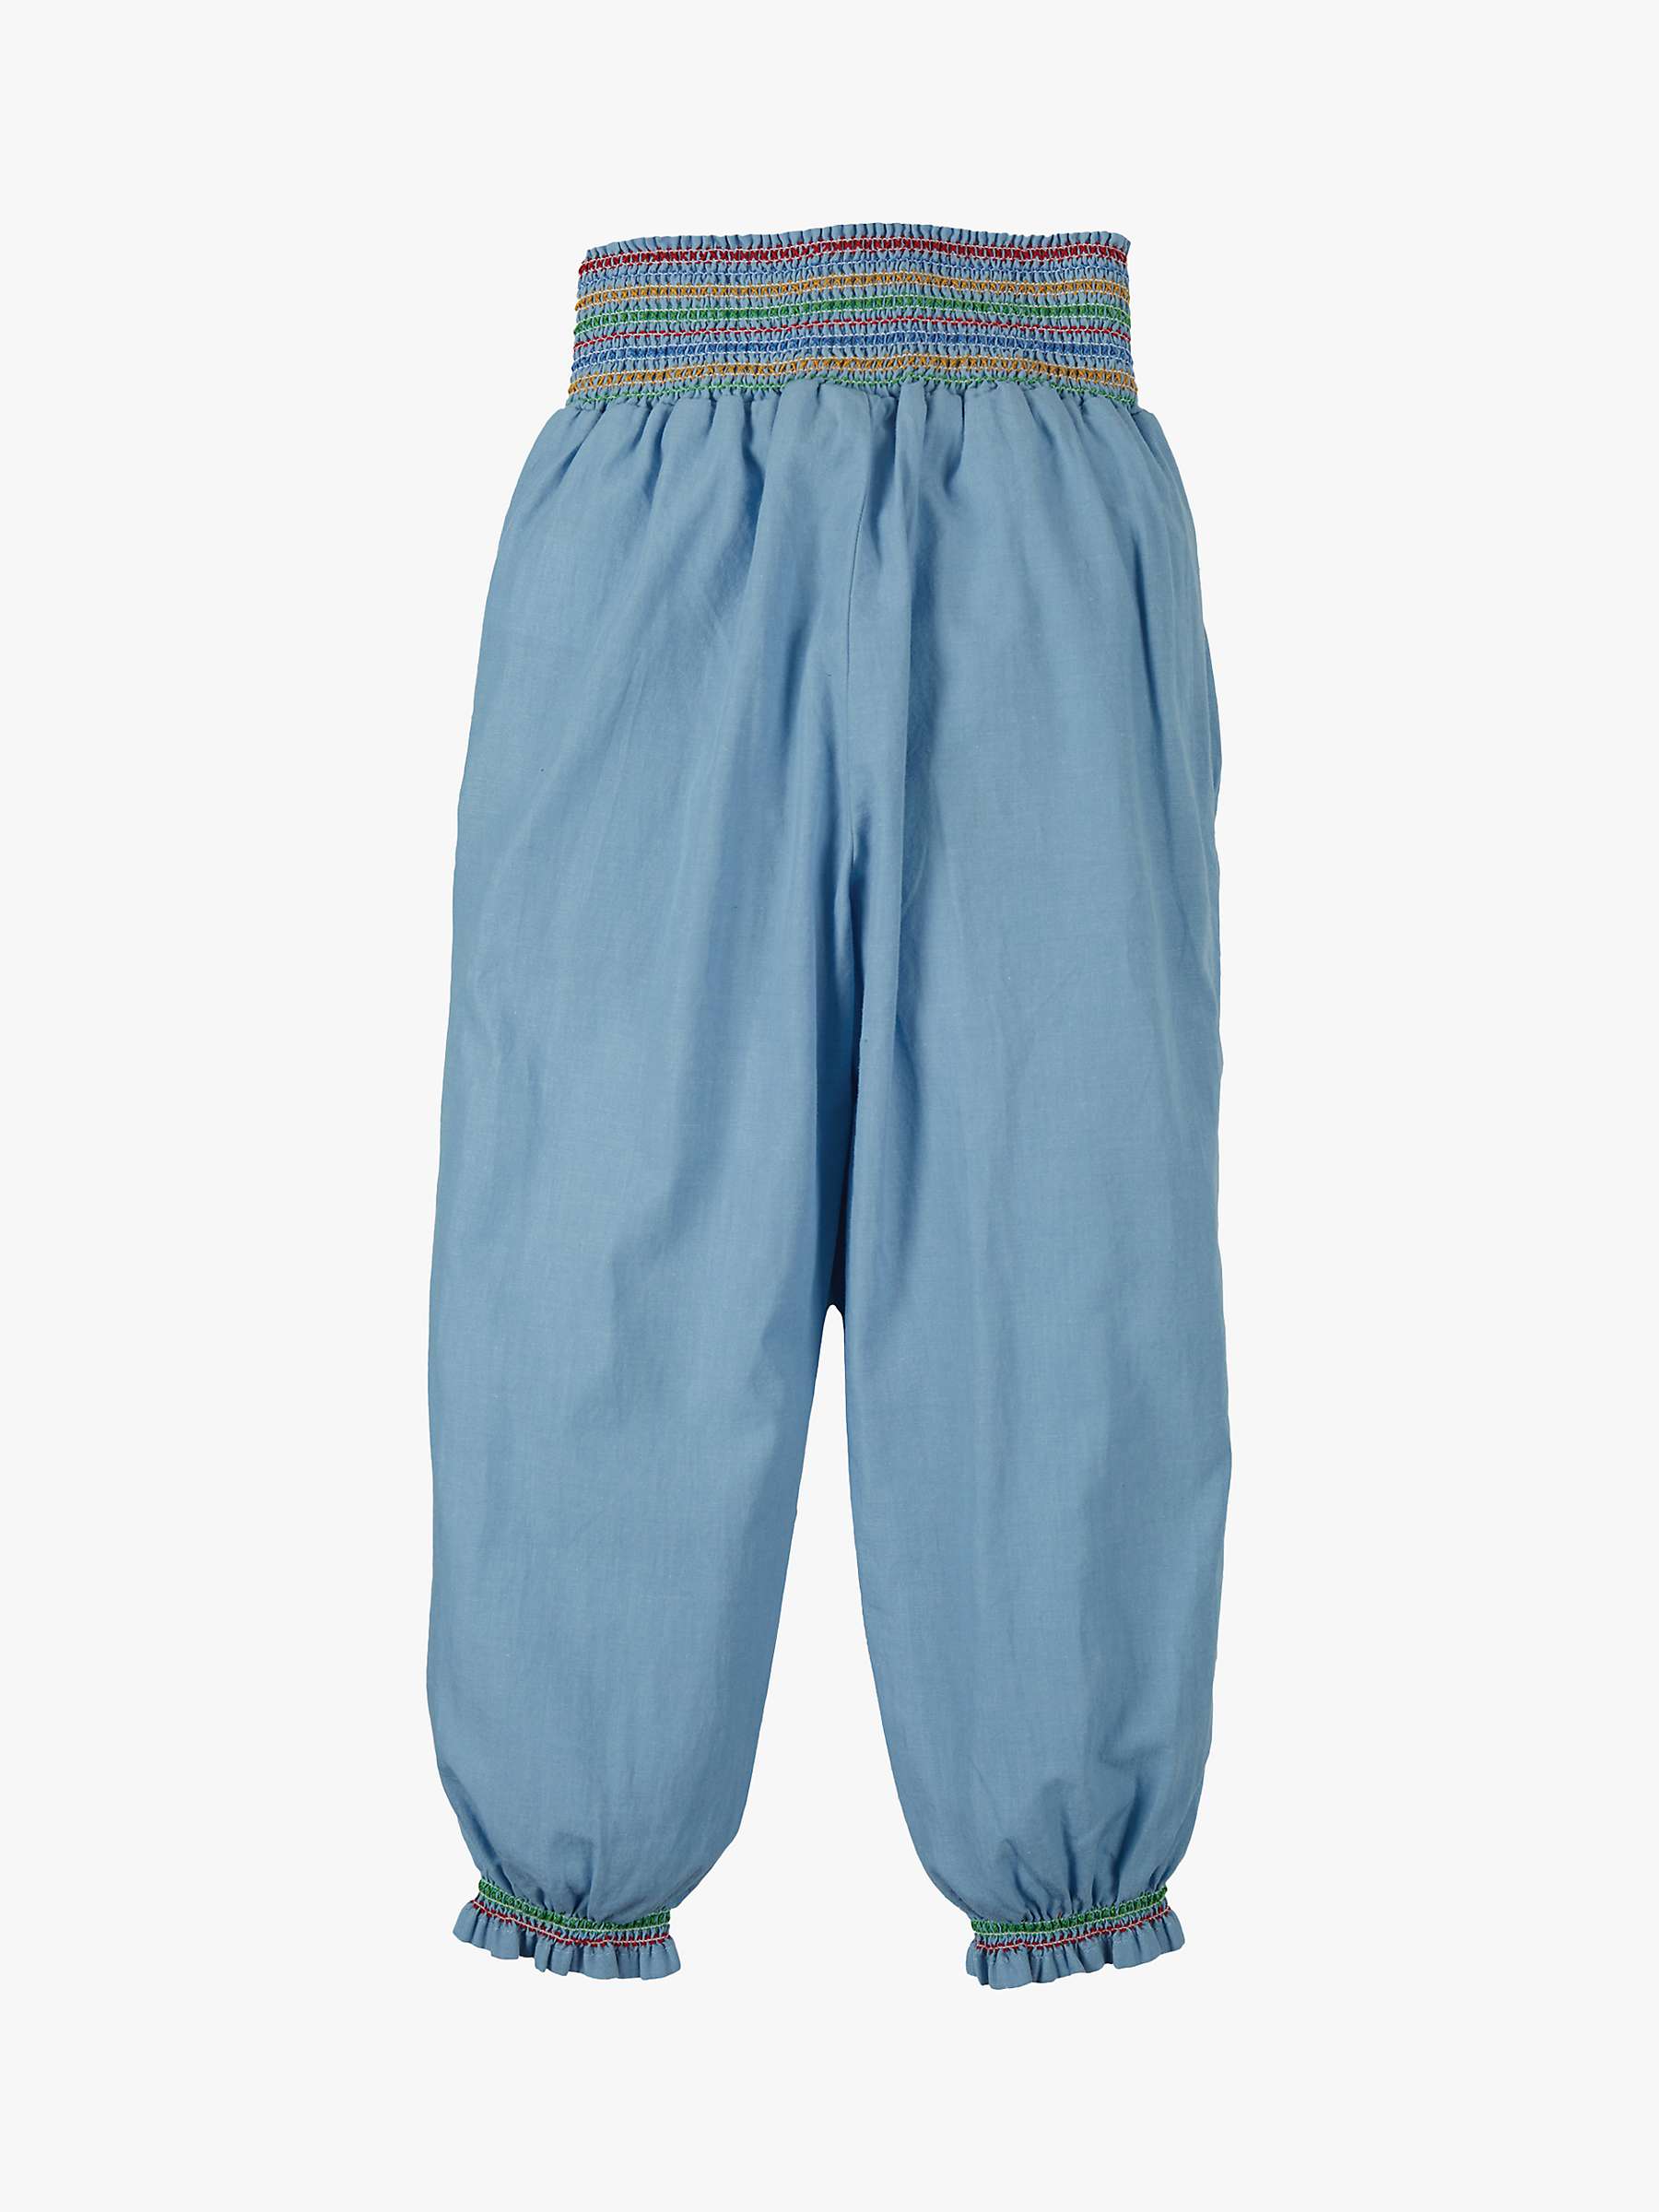 Buy Frugi Kids' Hermione Organic Cotton Harem Trousers, Chambray Online at johnlewis.com